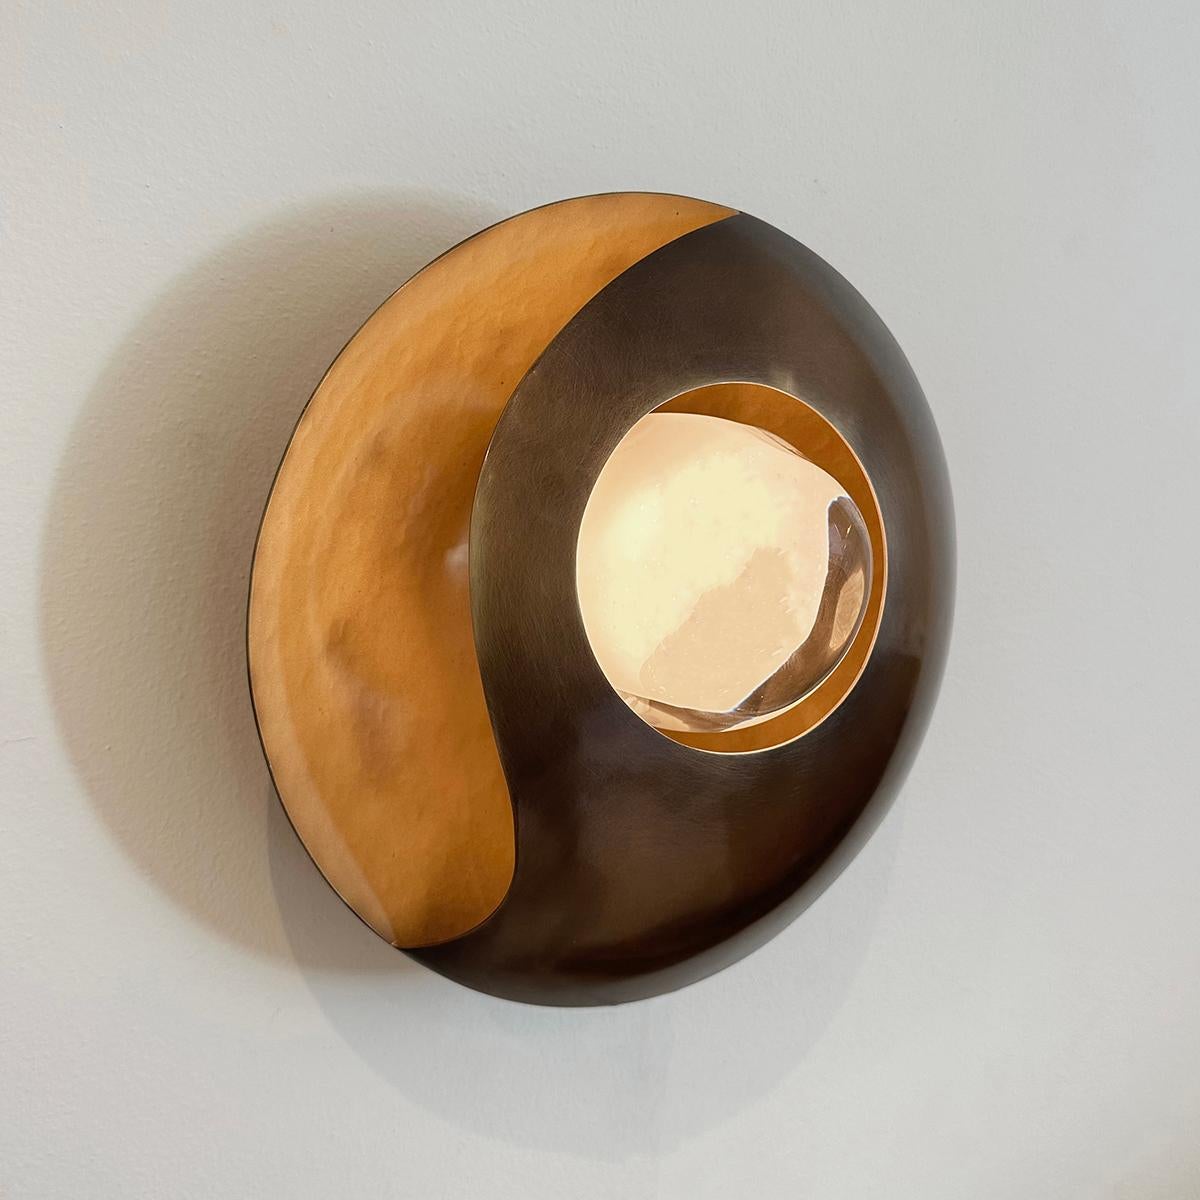 The Luna wall light’s simple round shape is elevated by its elliptical cross-section and distinctive cut-outs that let out a soft glow. At the center is our Sfera glass handblown in Murano. Shown with a satin brass interior and bronzo nuvolato